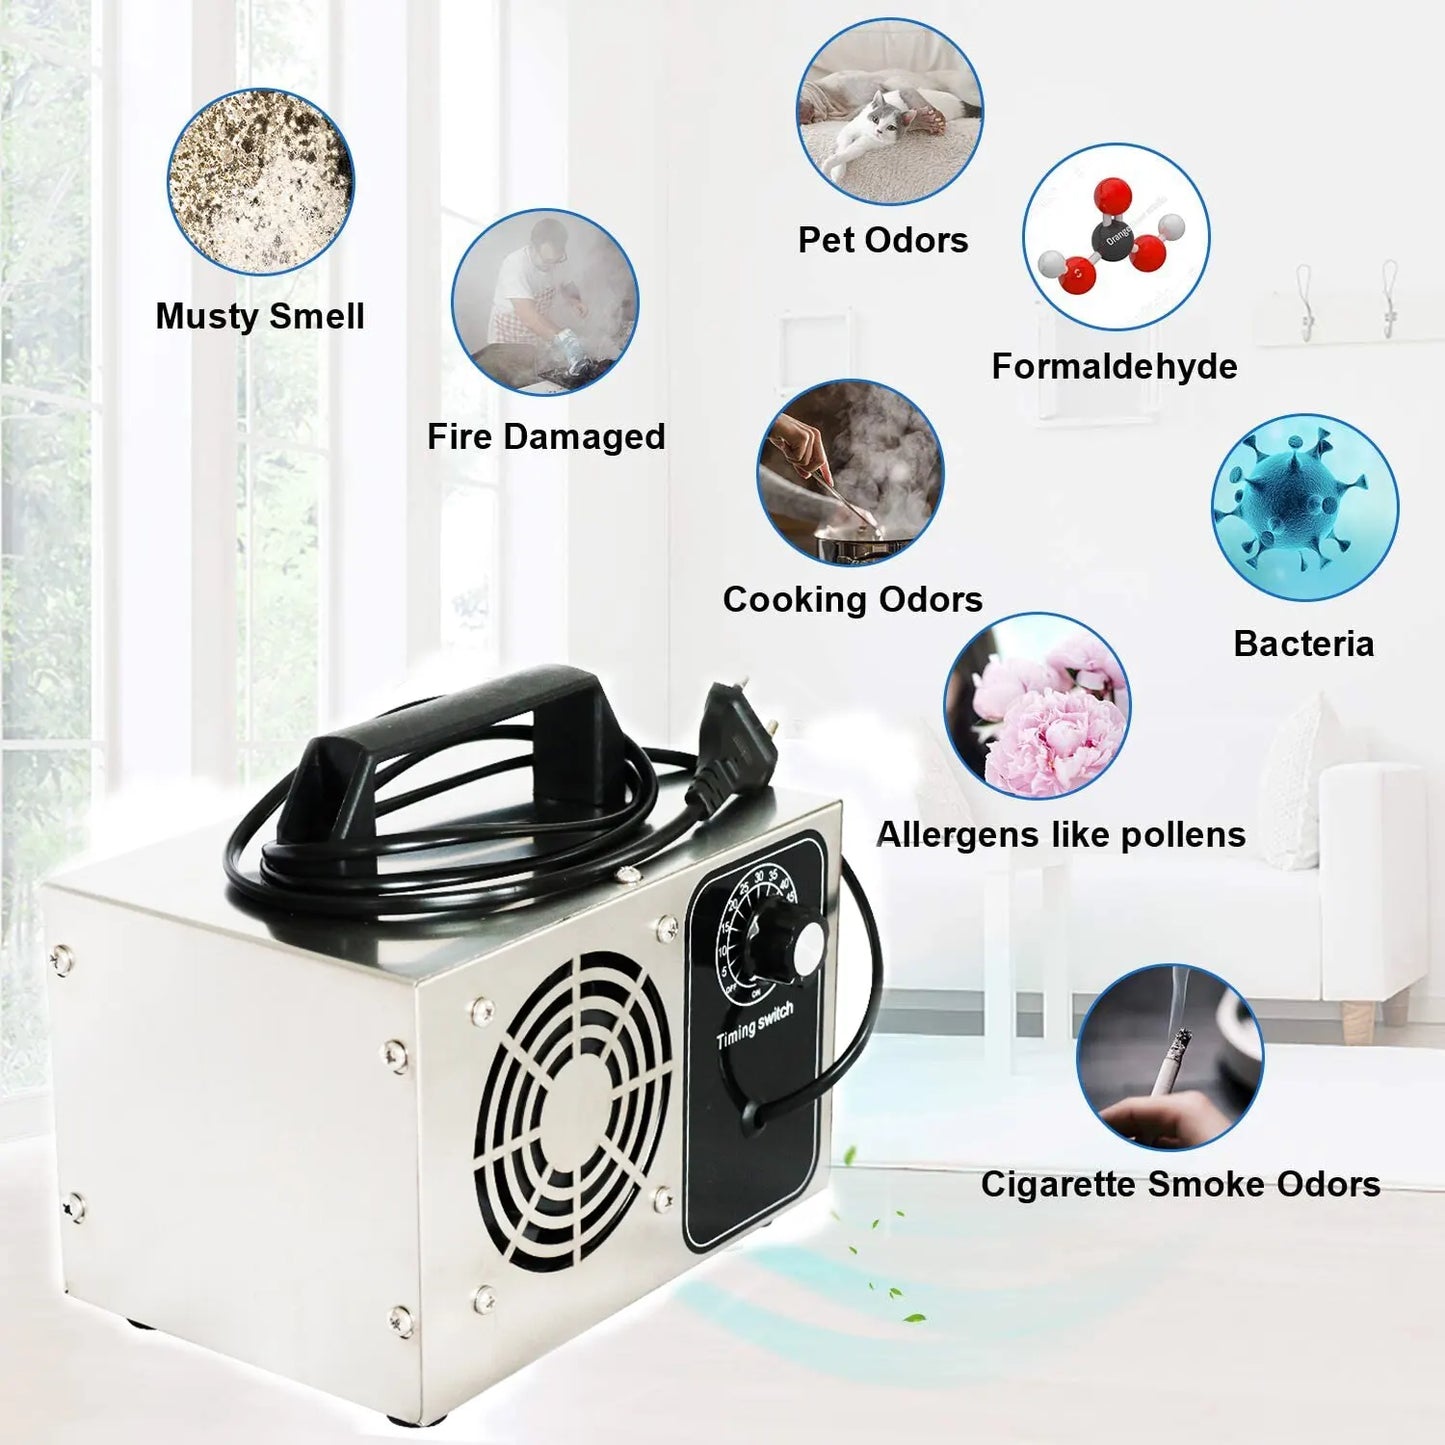 Air Purifier Ozone Generator 220V 60g Air Cleaner Ozono Disinfection Sterilization Ozonizer Cleaning Formaldehy